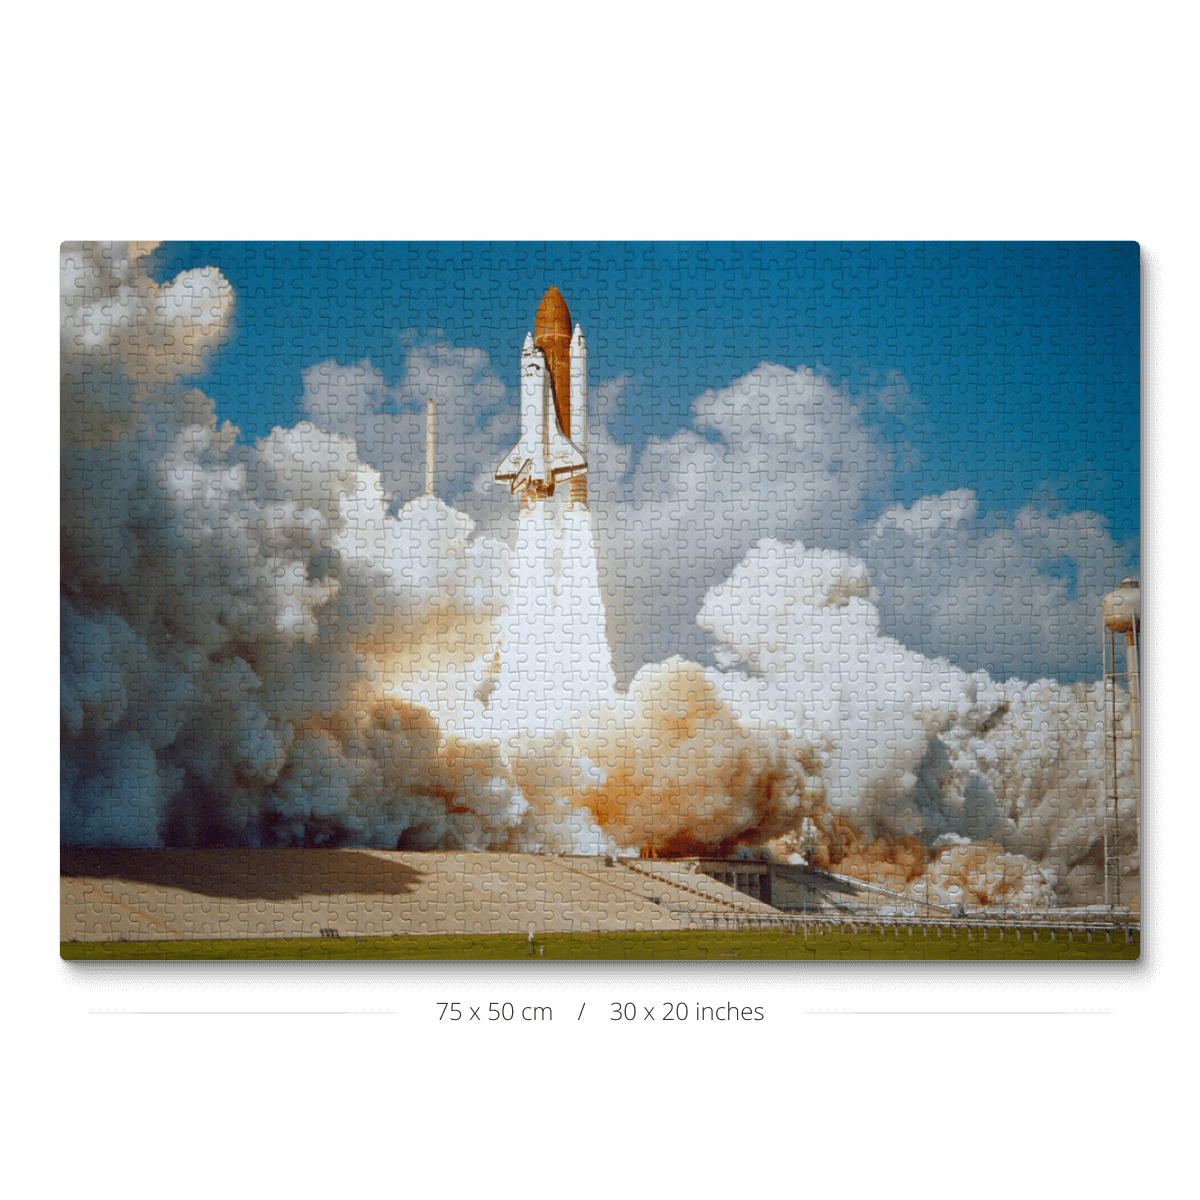 A 1000 piece puzzle showing a NASA space shuttle liftoff.